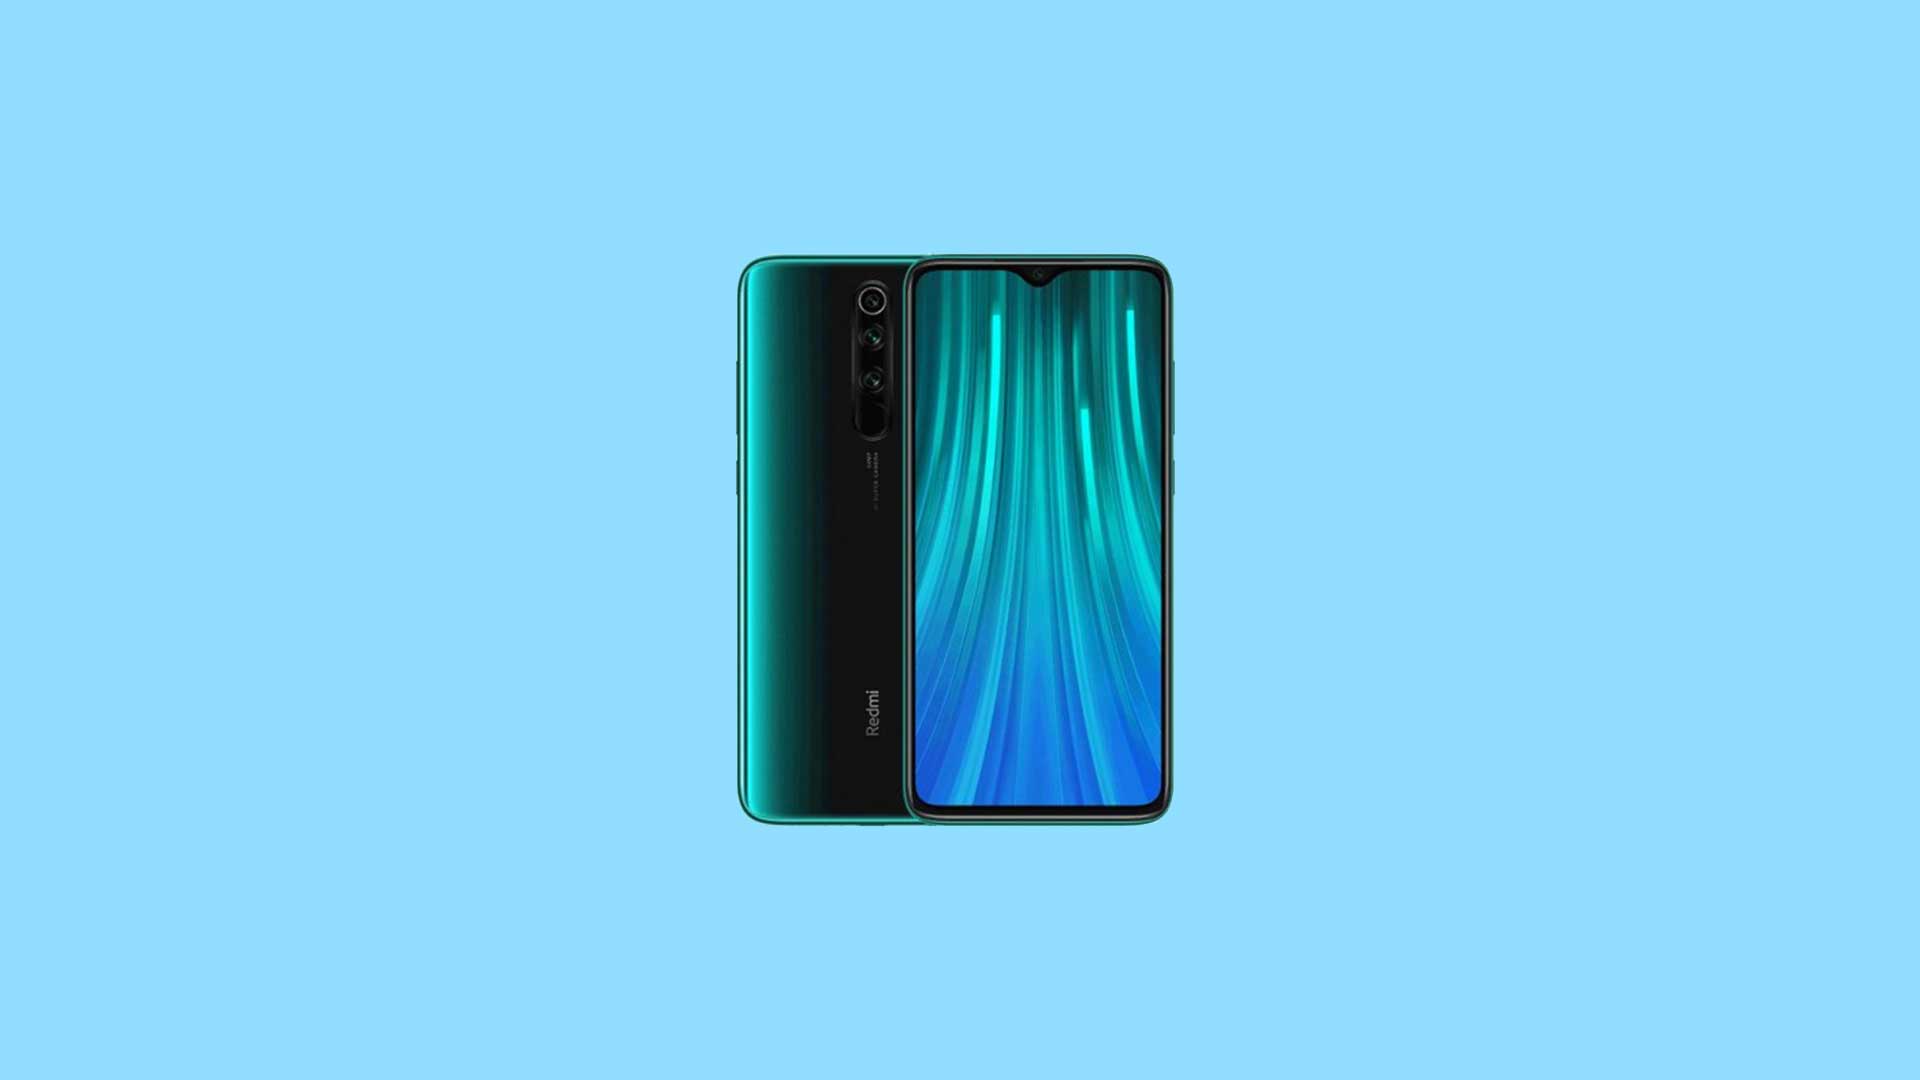 V12.5.6.0.RCXMIXM: MIUI 12 (12.5.6.0) Global Stable ROM for Redmi Note 8T